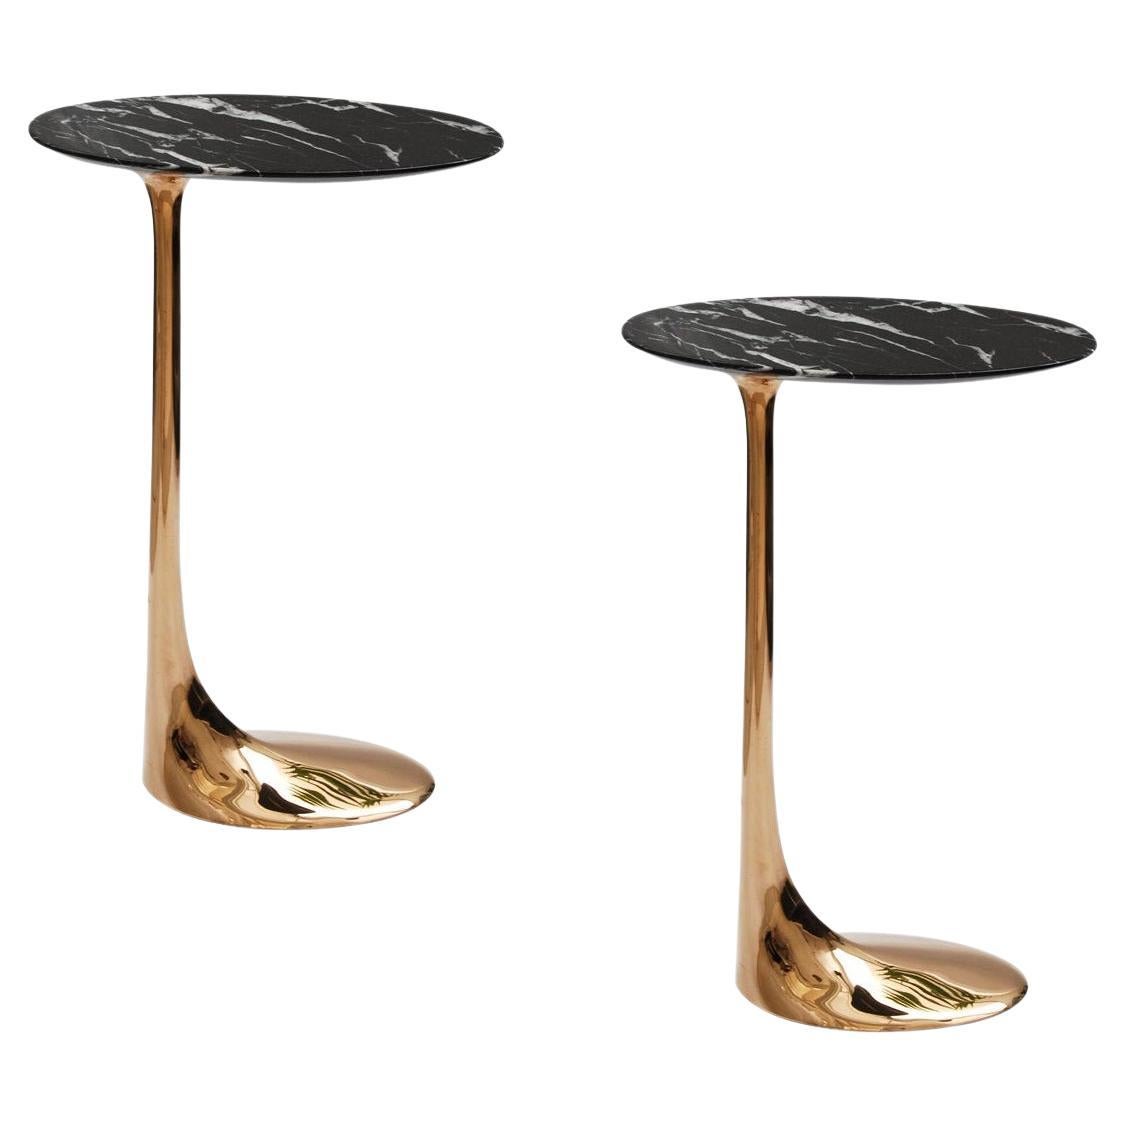 Pair of Polished Bronze Tables with Marquina Marble Top by Fakasaka Design